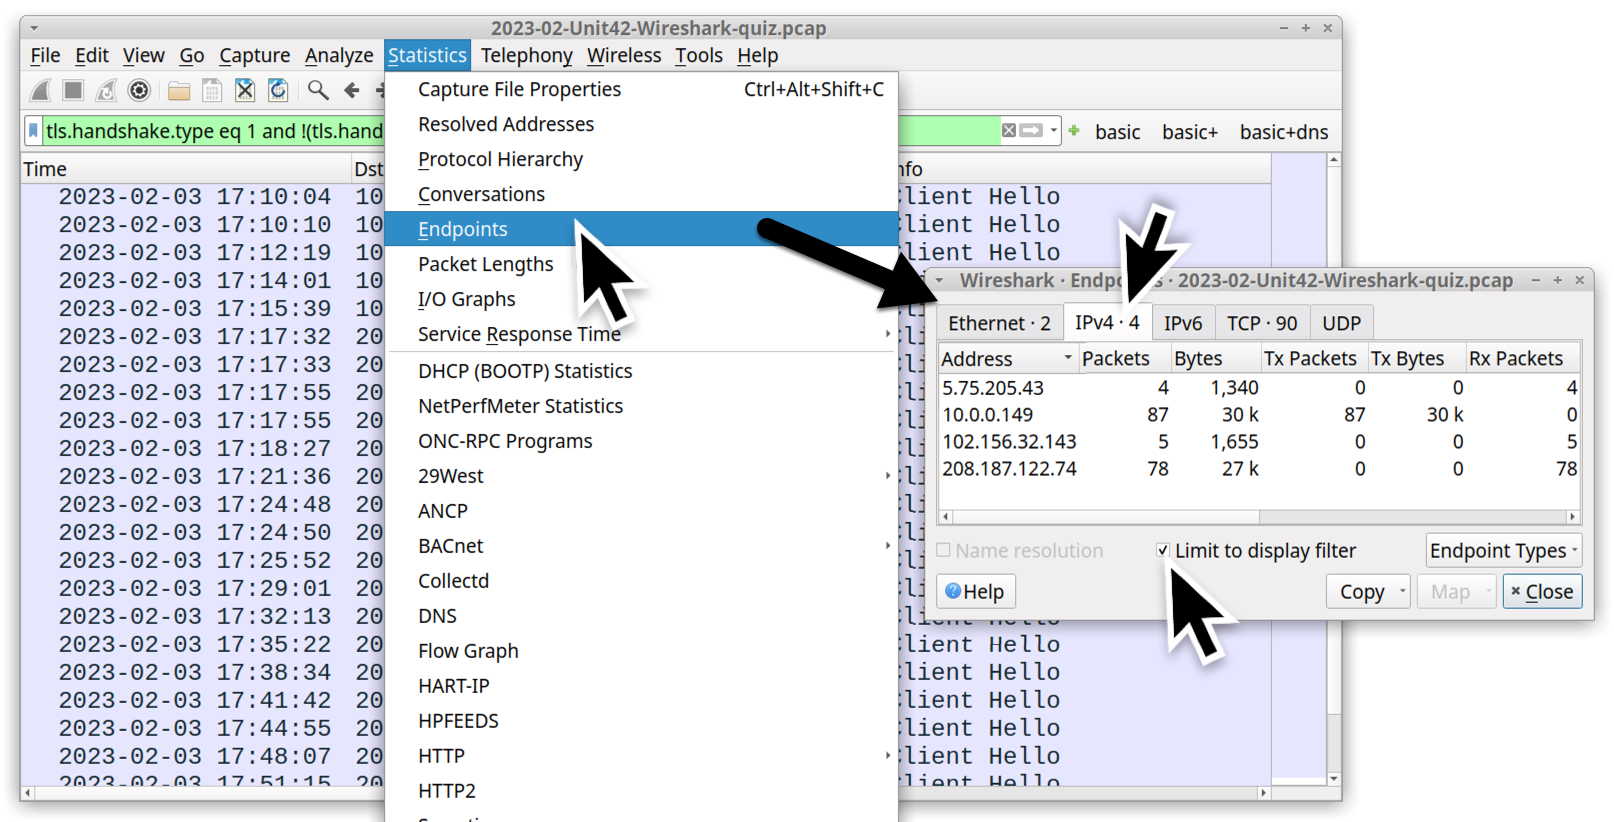 Image 8 is a screenshot of Wireshark showing how to use the Statistics menu to access Endpoints and see the statistics for the filtered results.